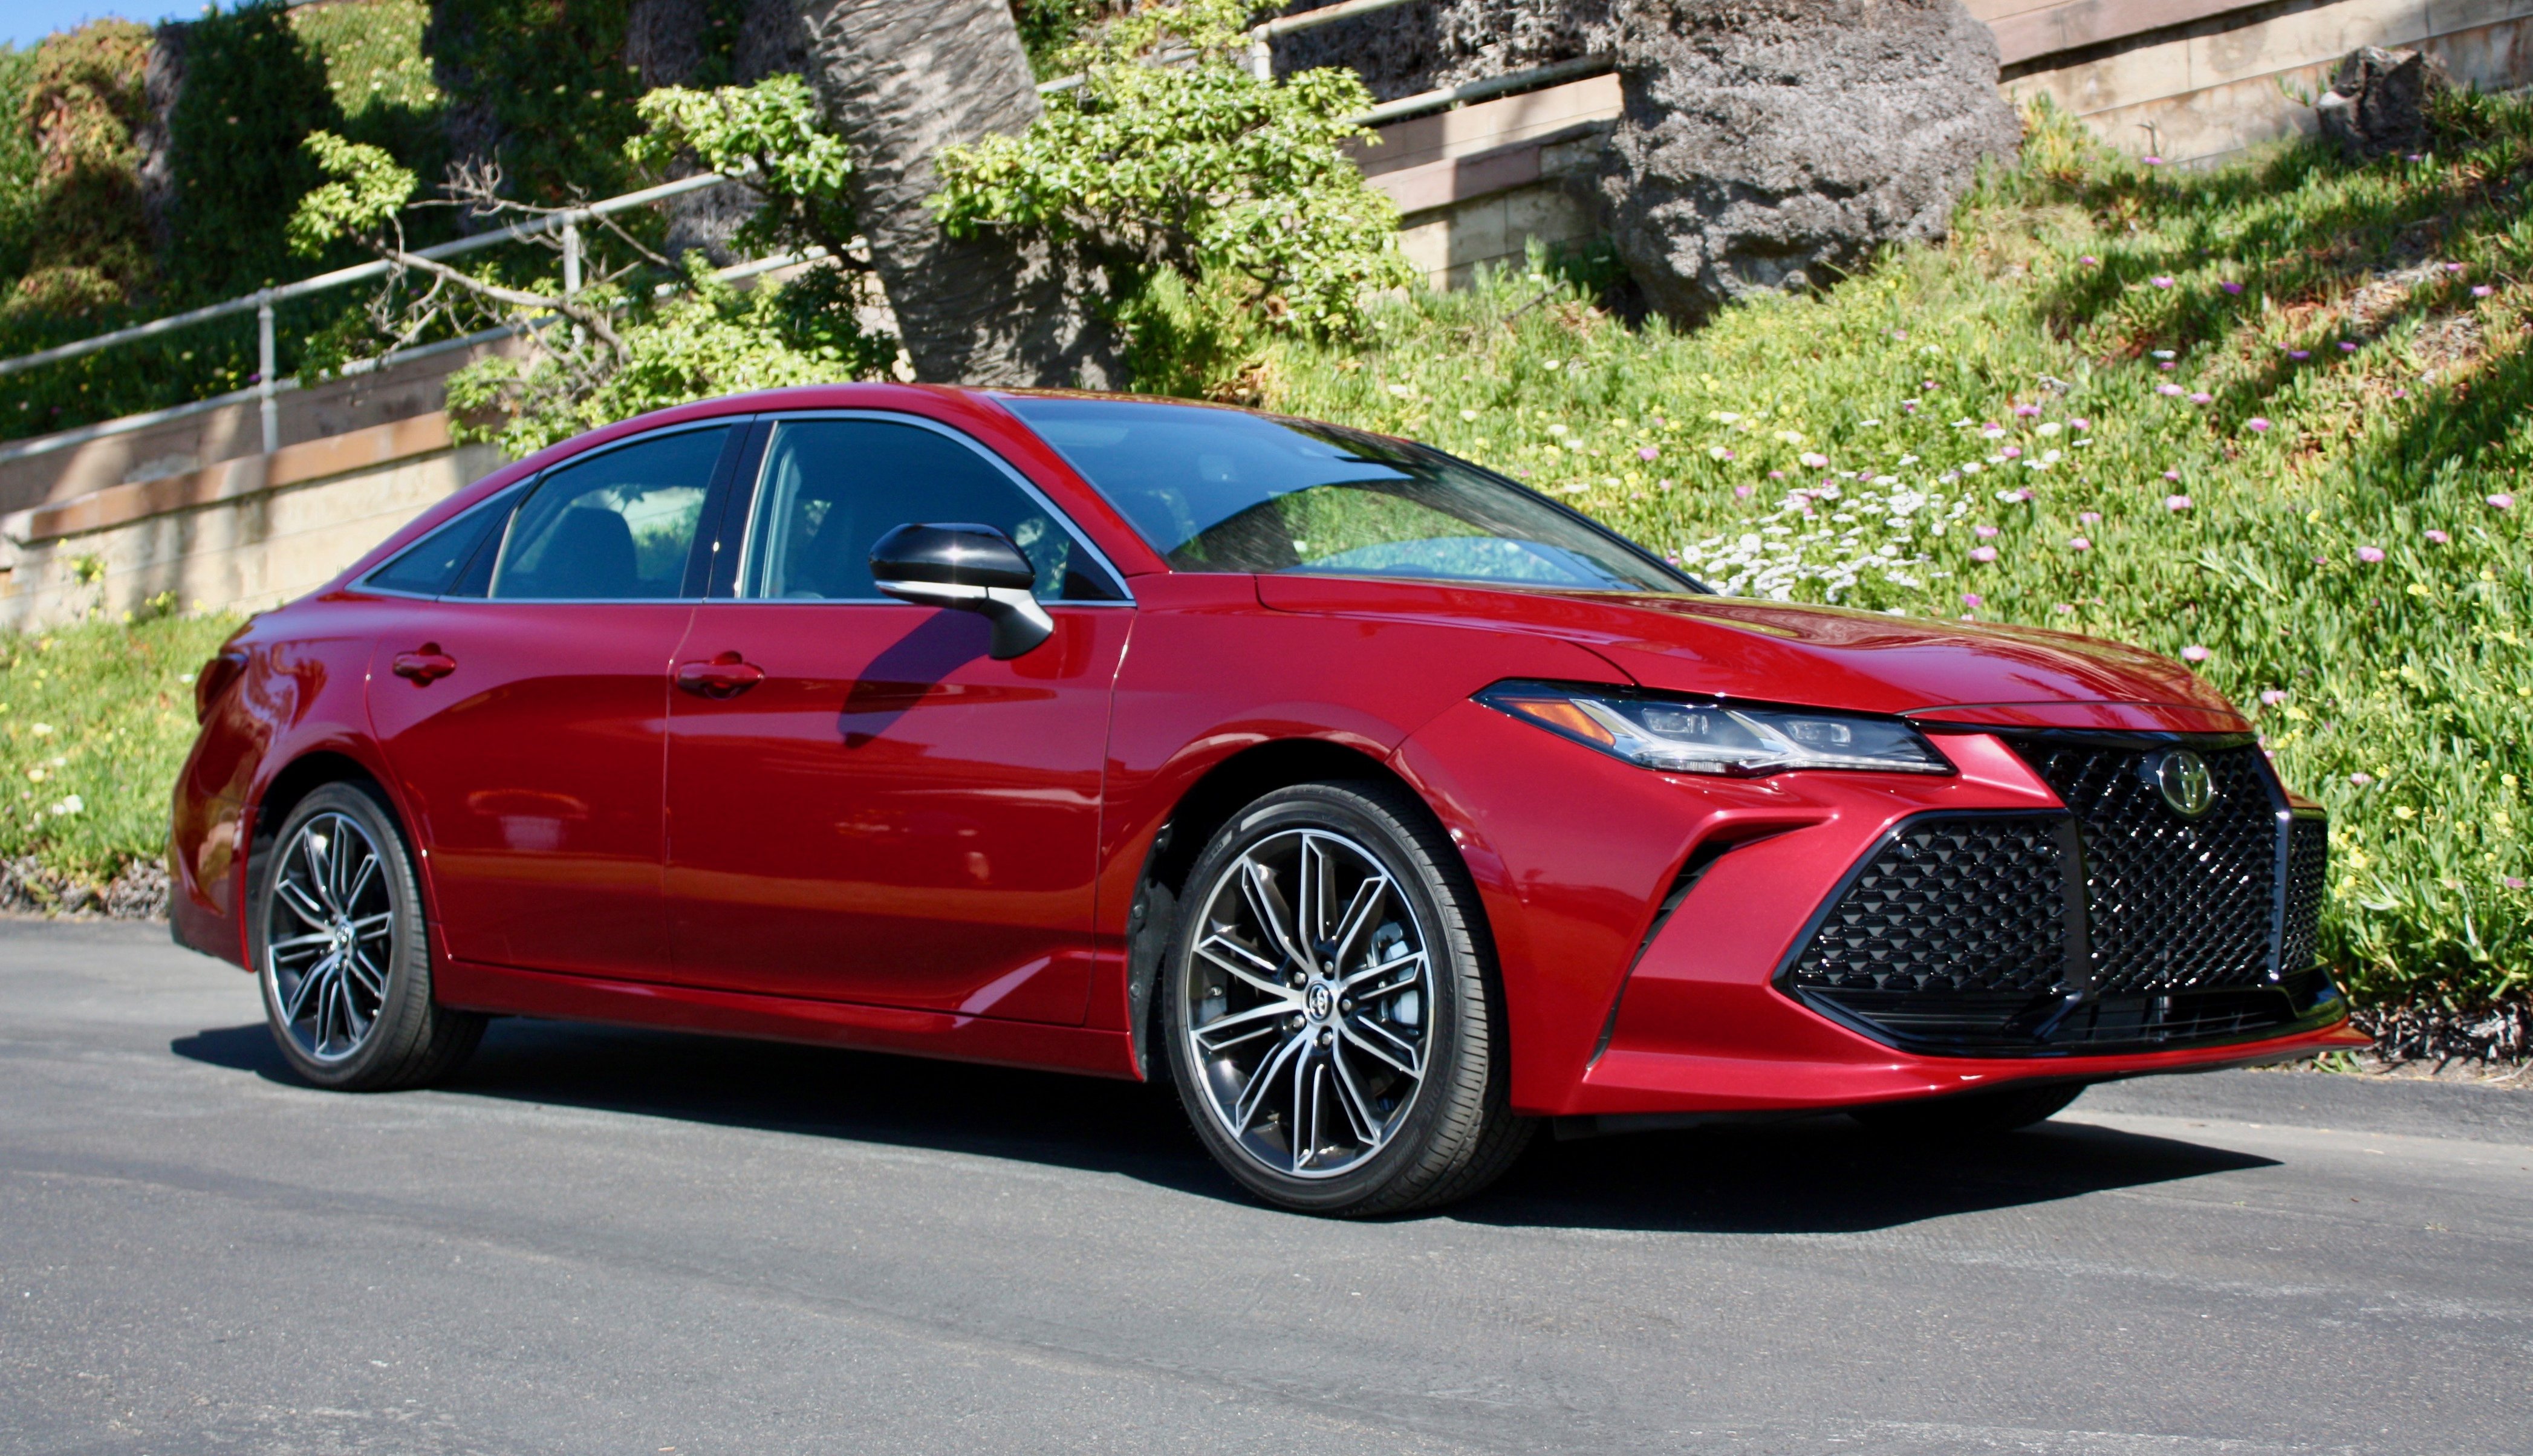 2019 Toyota Avalon: First Drive Impressions | Top Speed